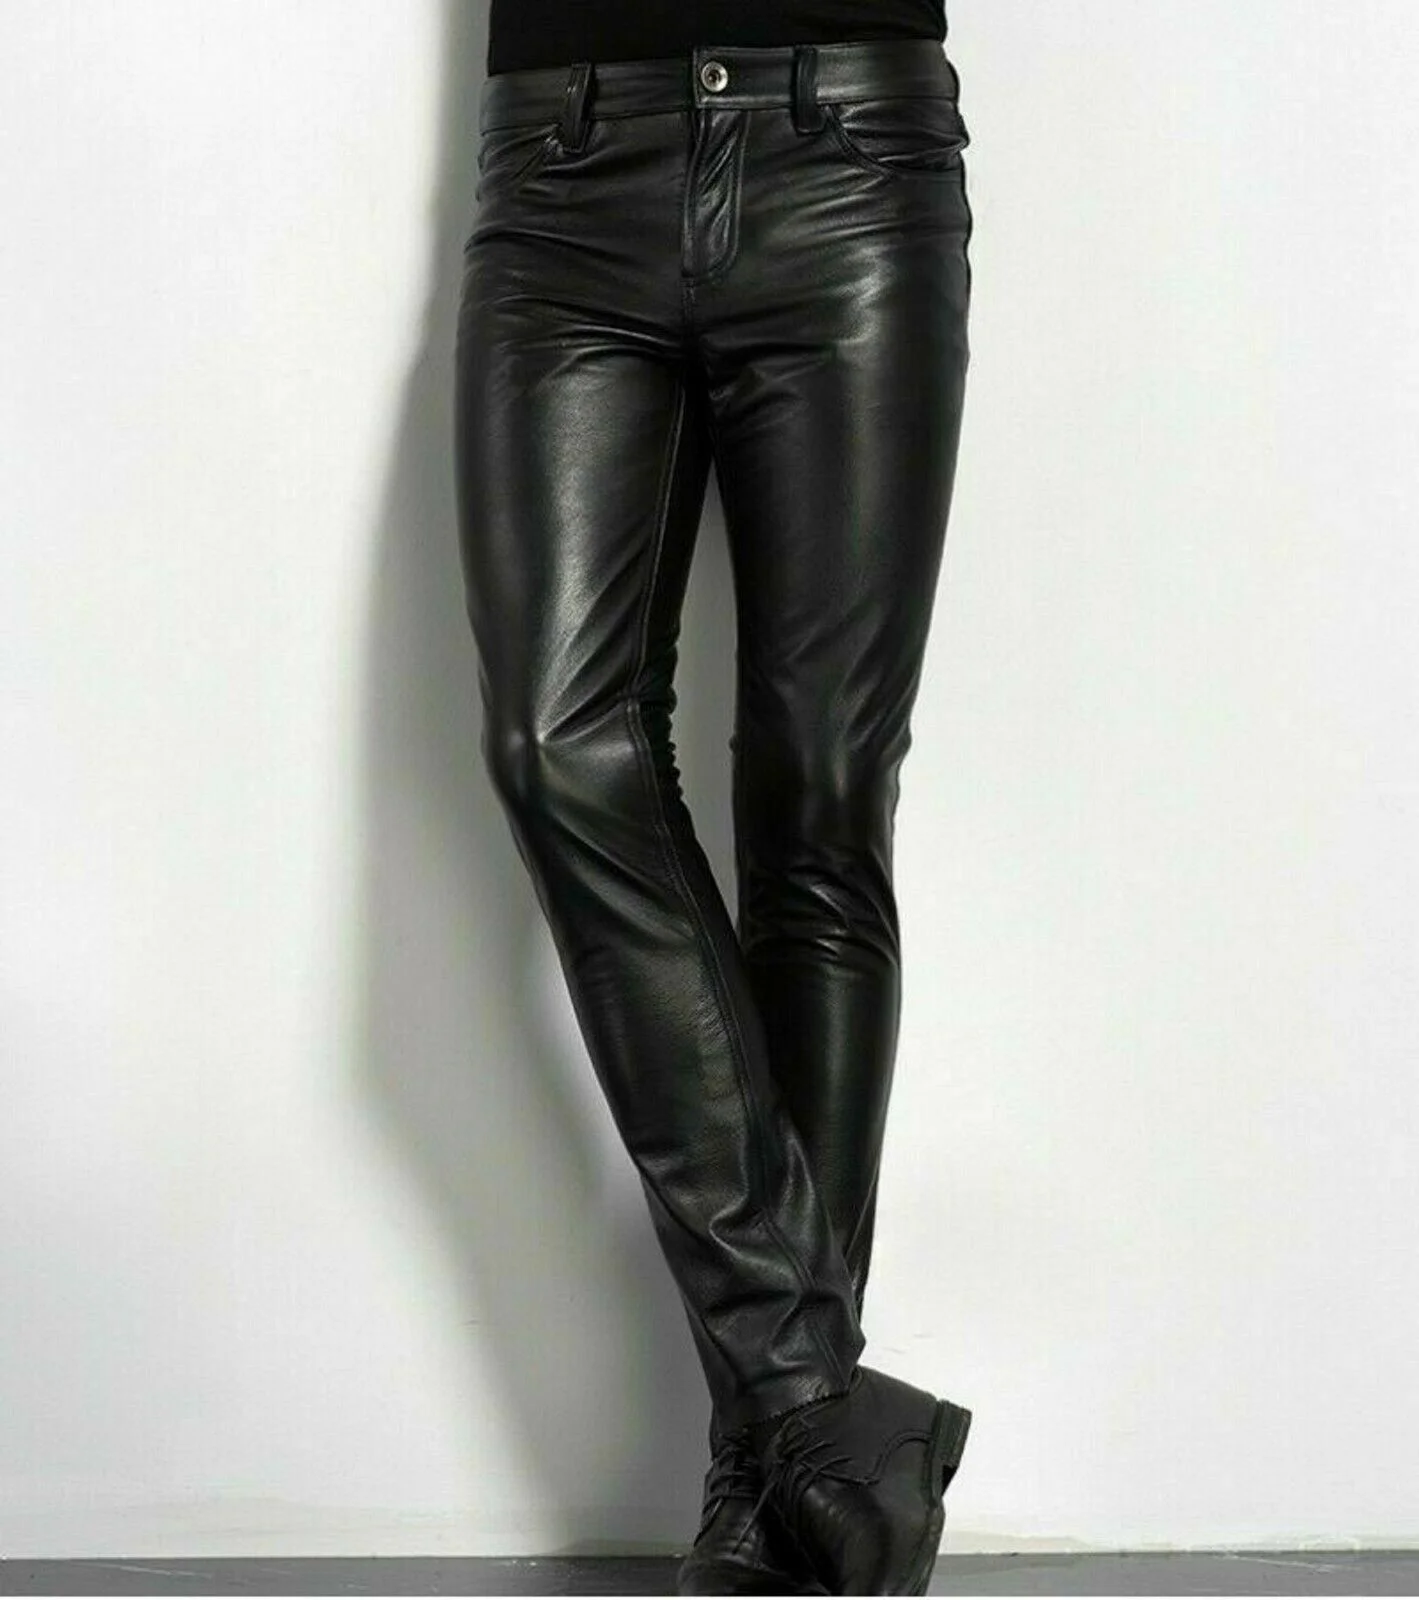 Choice PU Leather Pants Men's Fashion Rock Style Night Club Dance Pants Men's Faux Leather Slim Fit Skinny Motorcycle Trousers 4